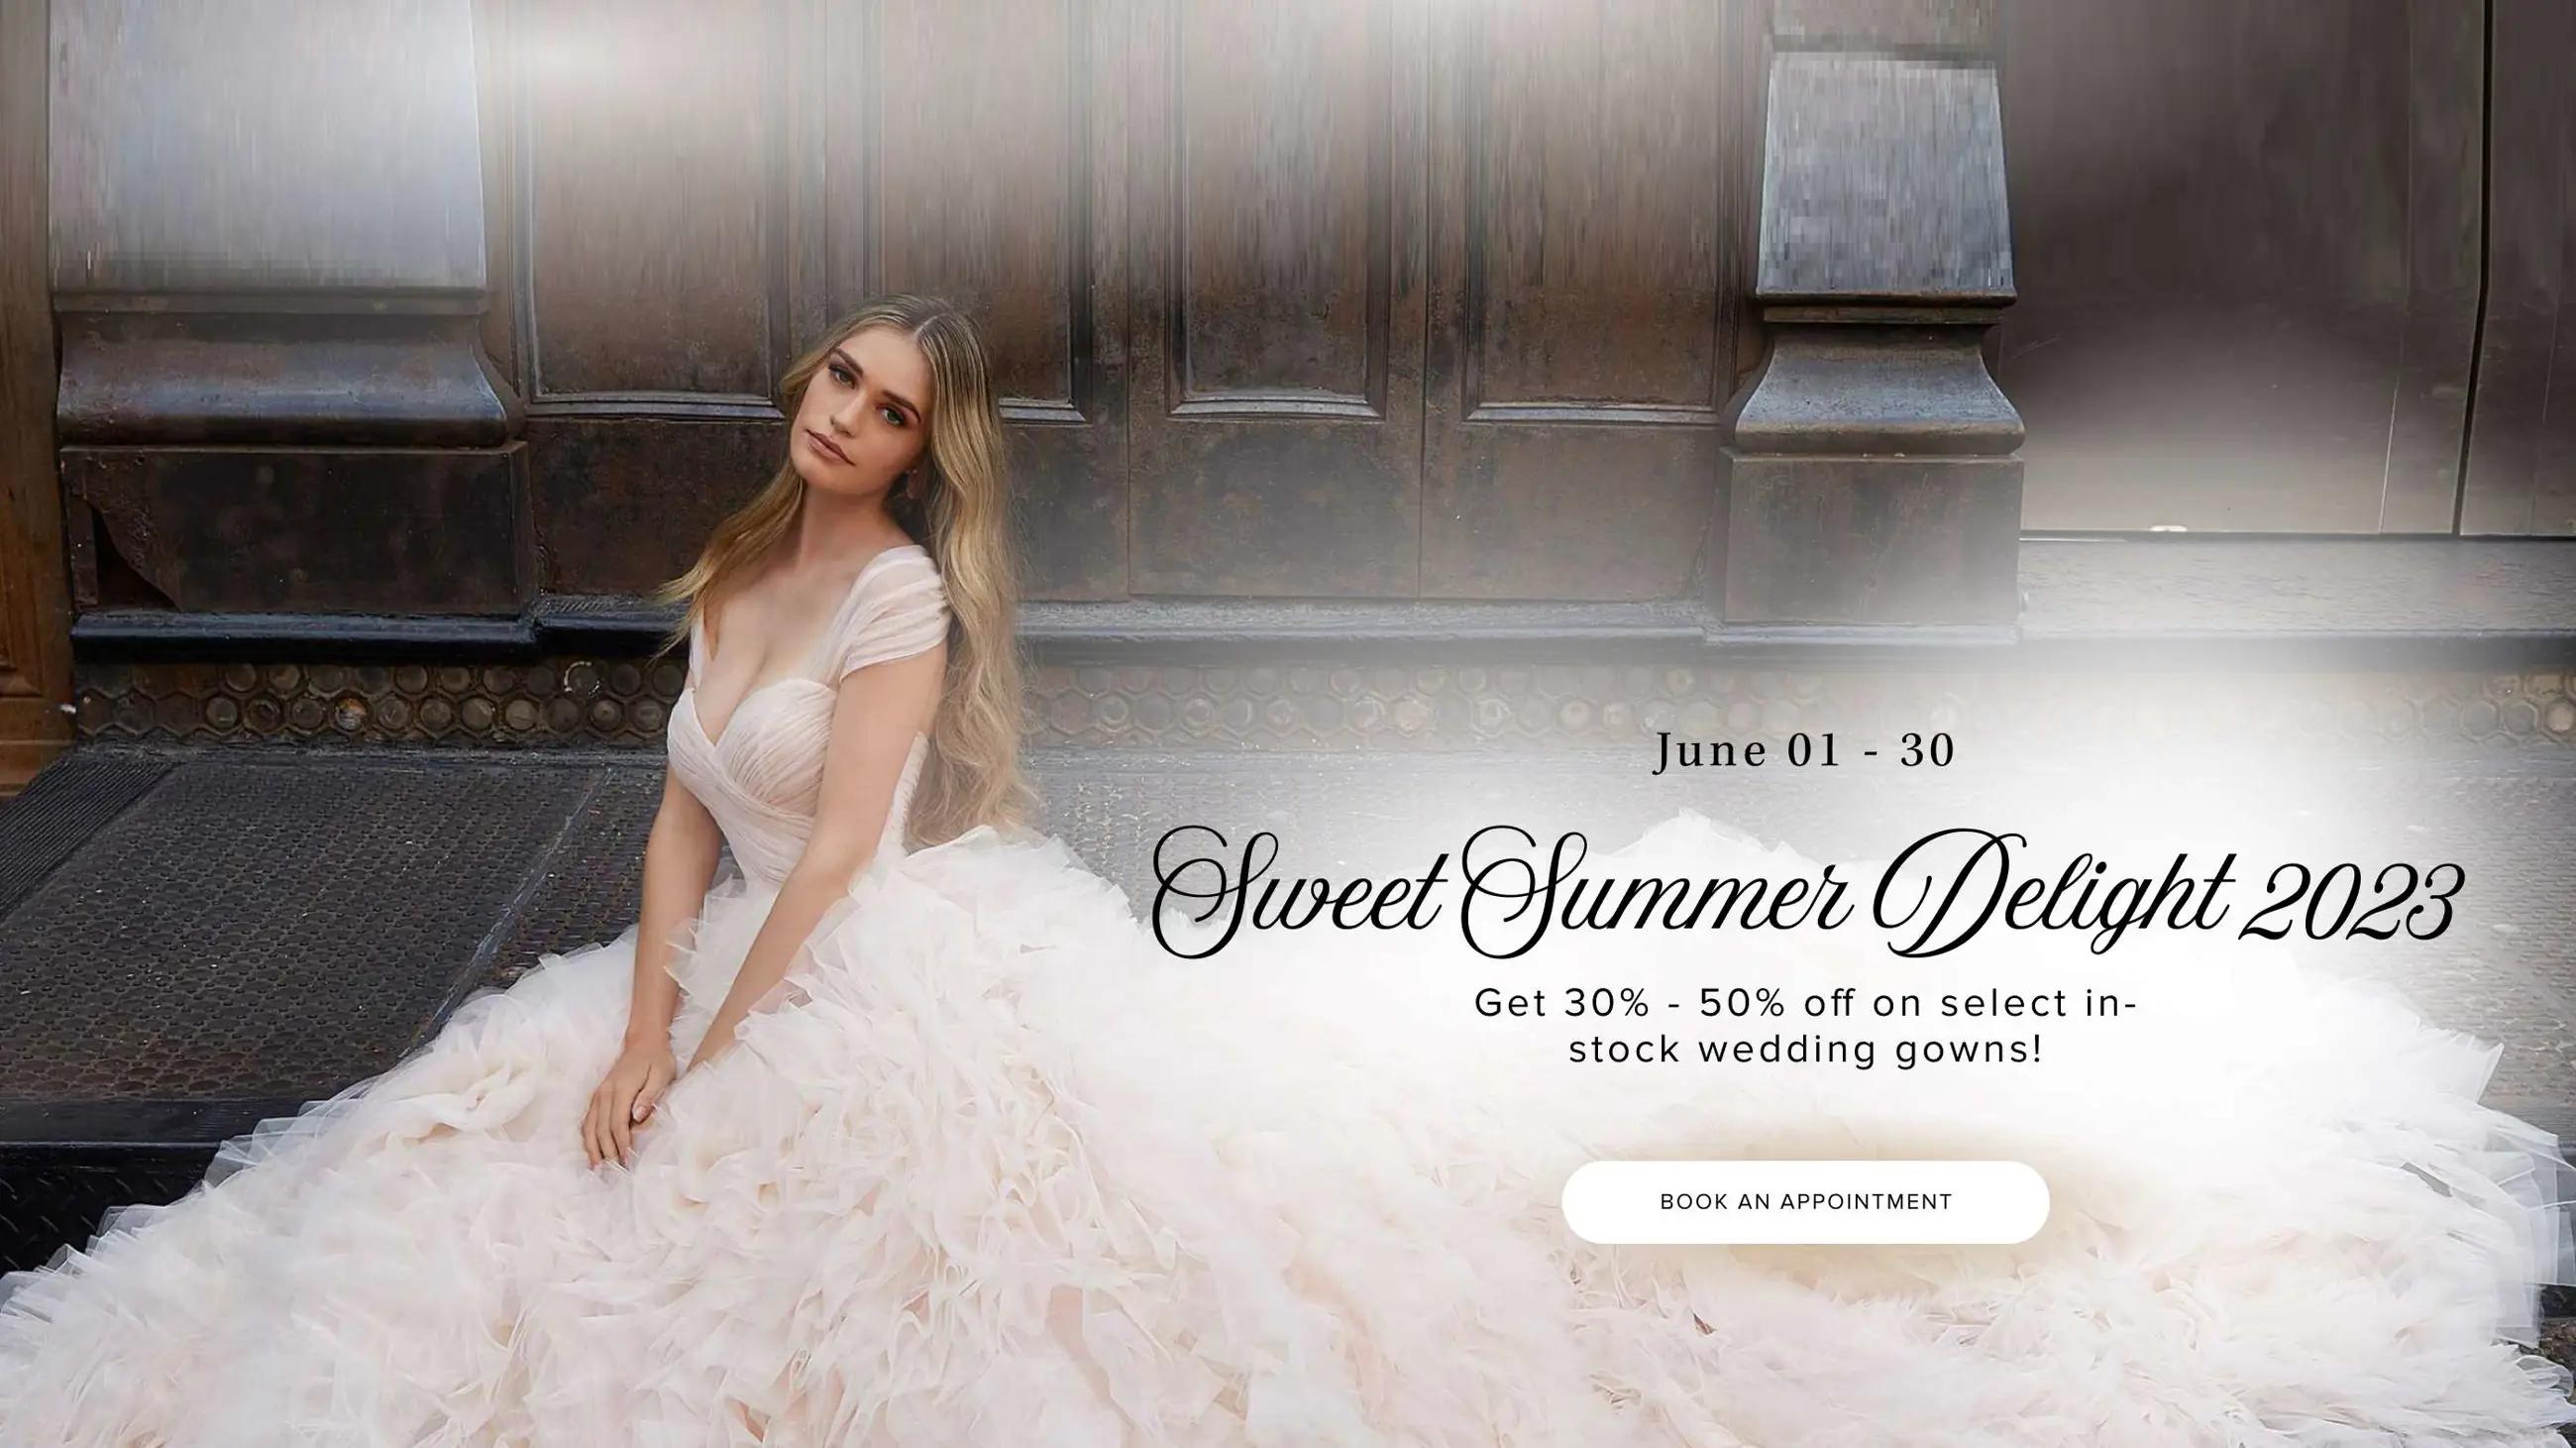 Sweet Summer Delight 2023. We are offering a 30% - 50% discount on select in stock wedding gowns.